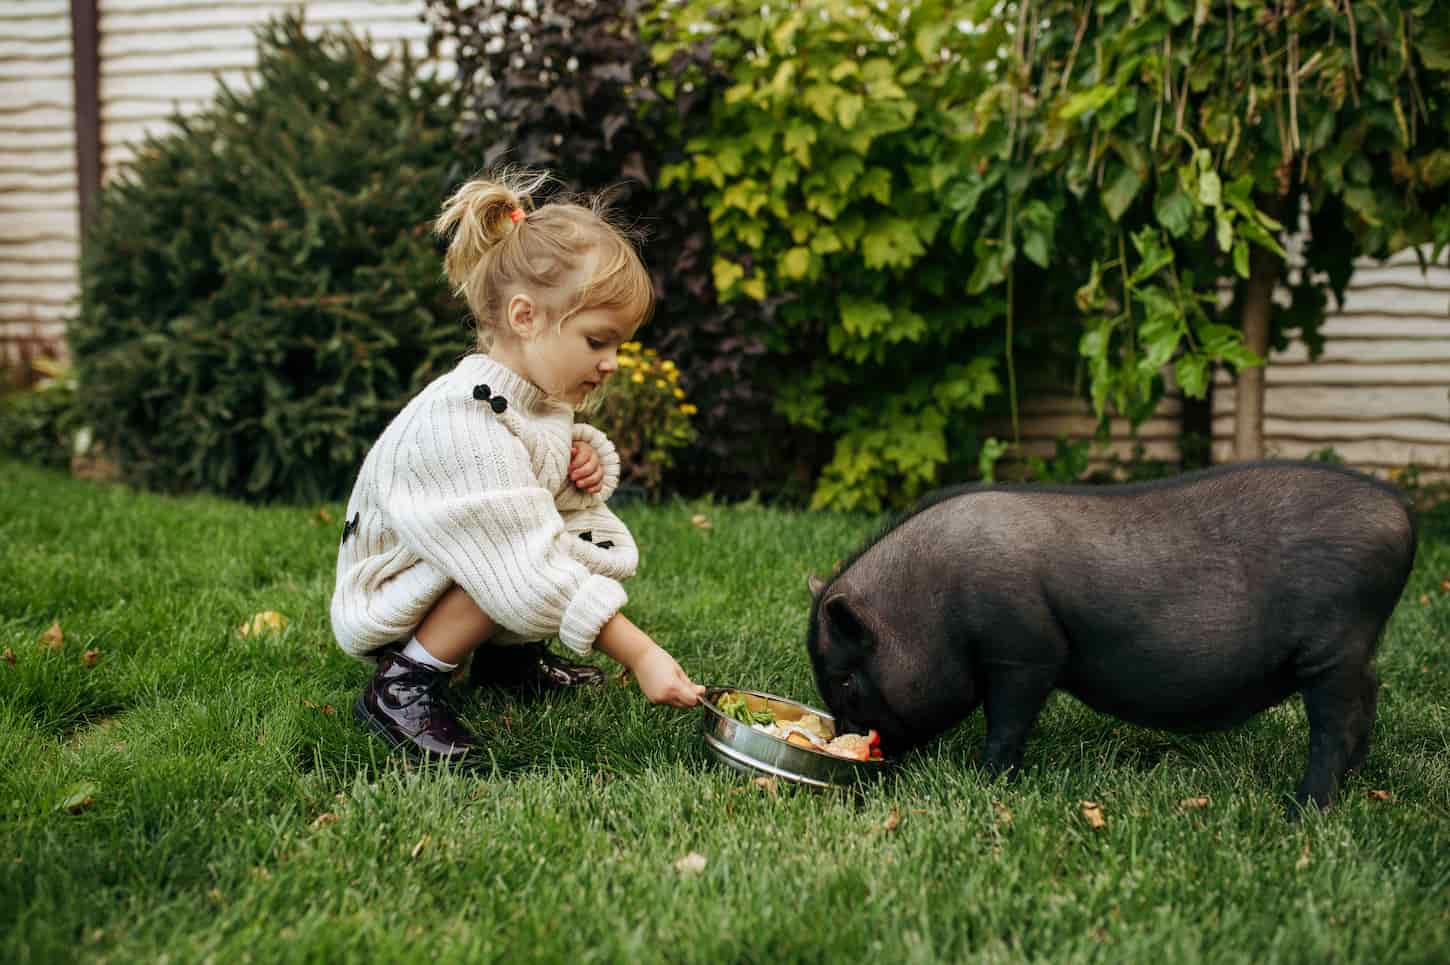 An image of a little girl feeding a black pig in the garden.